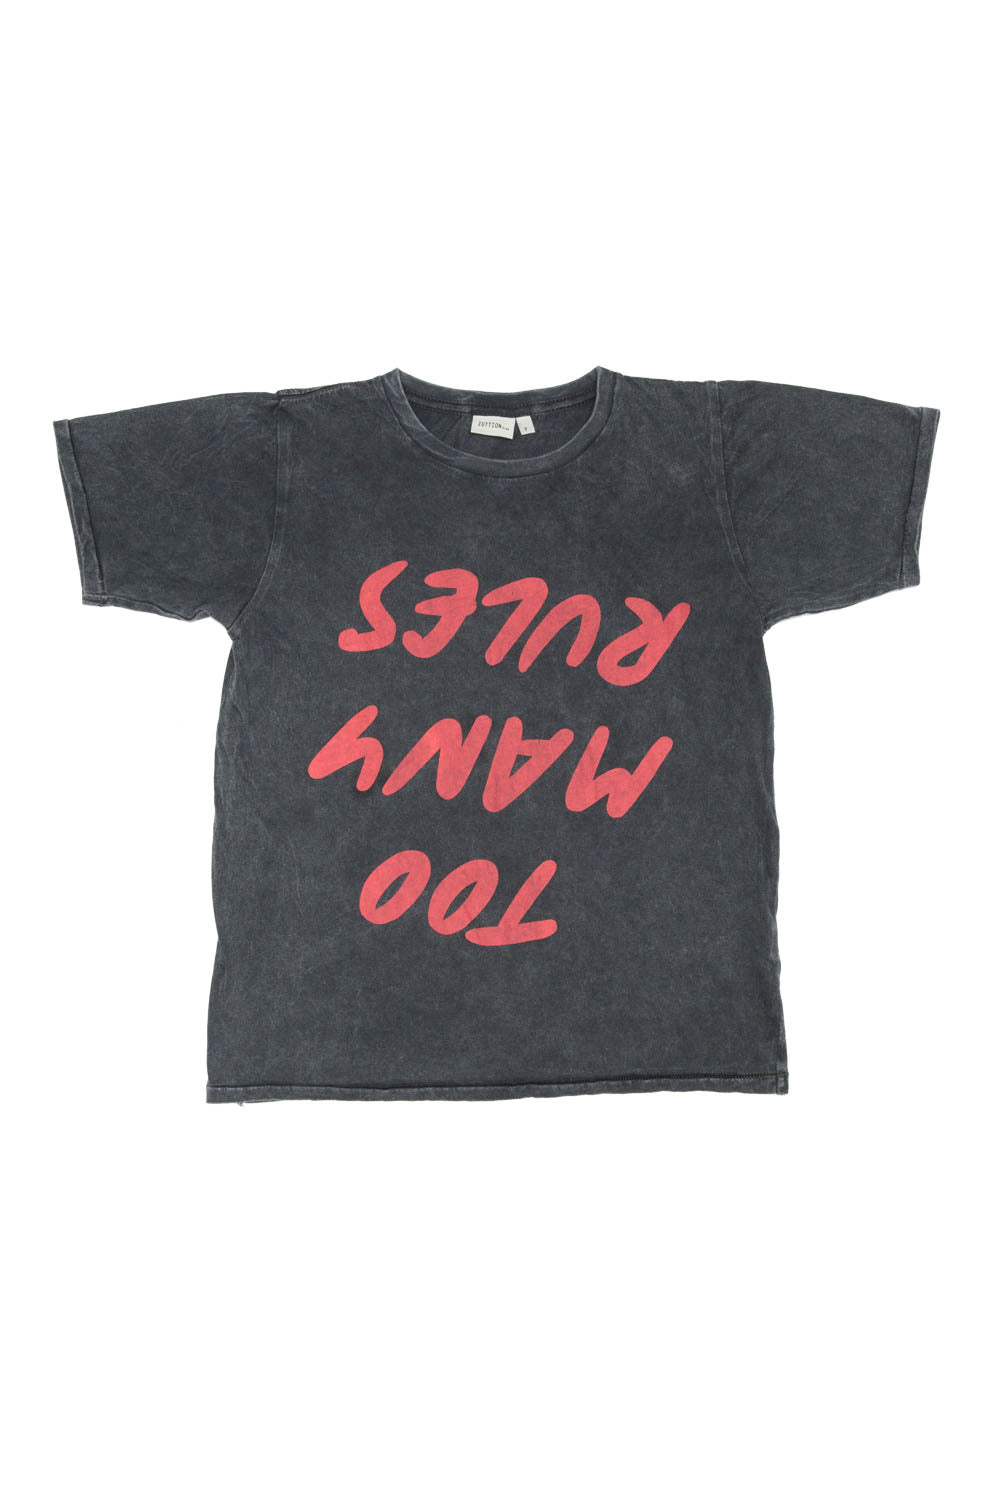 TOO MANY RULES S/S ROUND NECK T CHARCOAL - Zuttion